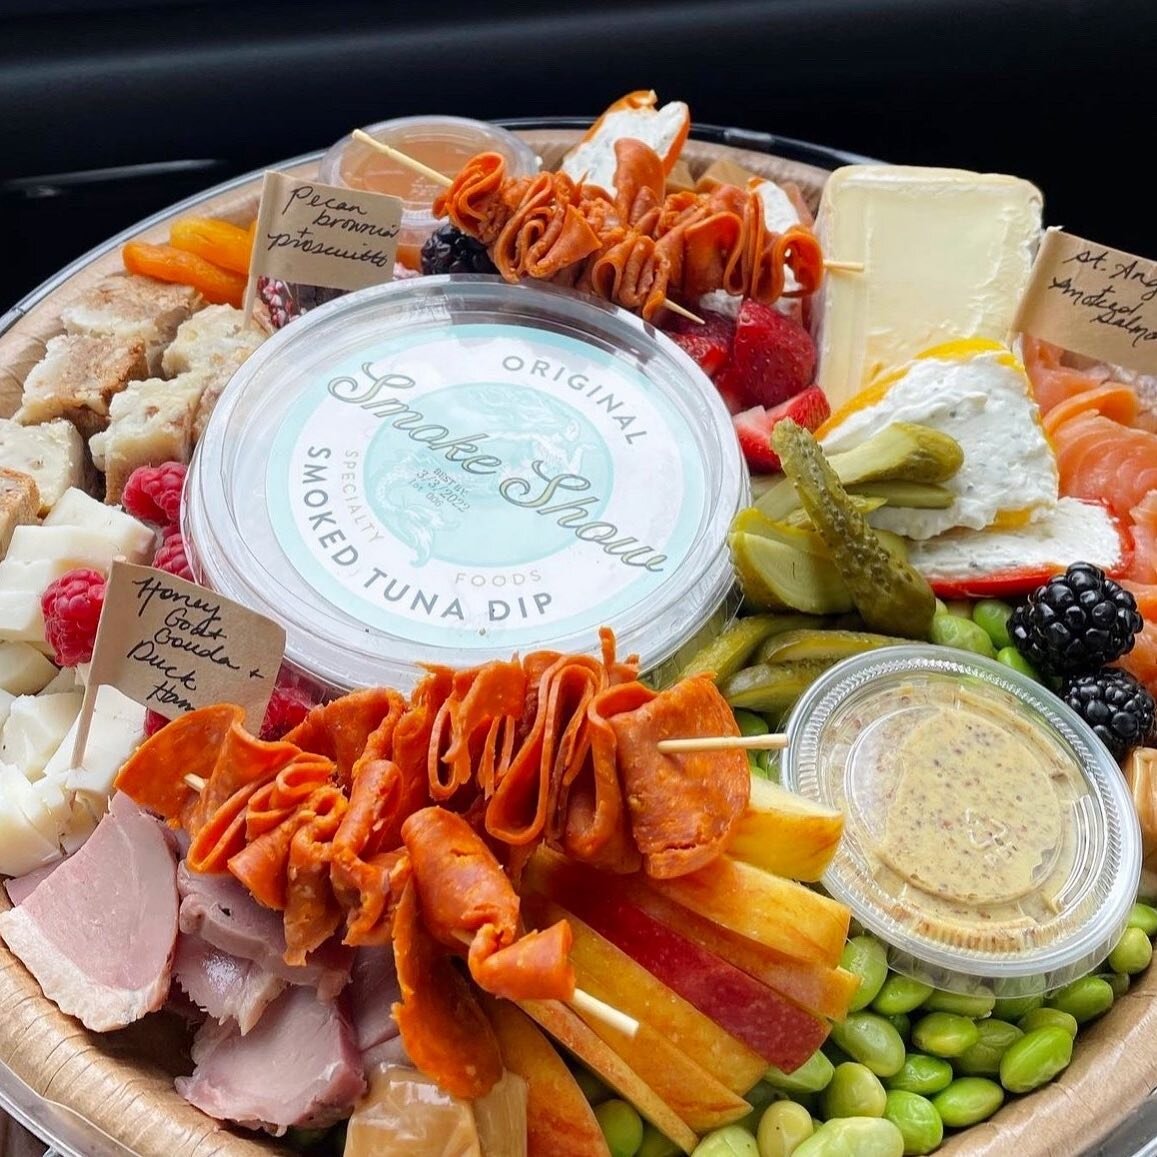 Savory + Sweet. 🍎 🧀 

Smoked Salmon, Smoked Tuna Dip, Honey Goat Gouda, Duck Ham, Creole Mustard, Stuffed Peppers, Prosciutto, Pecan Brownies + more! Keep this platter combo in mind for your next order! #NowTakingFallOrders